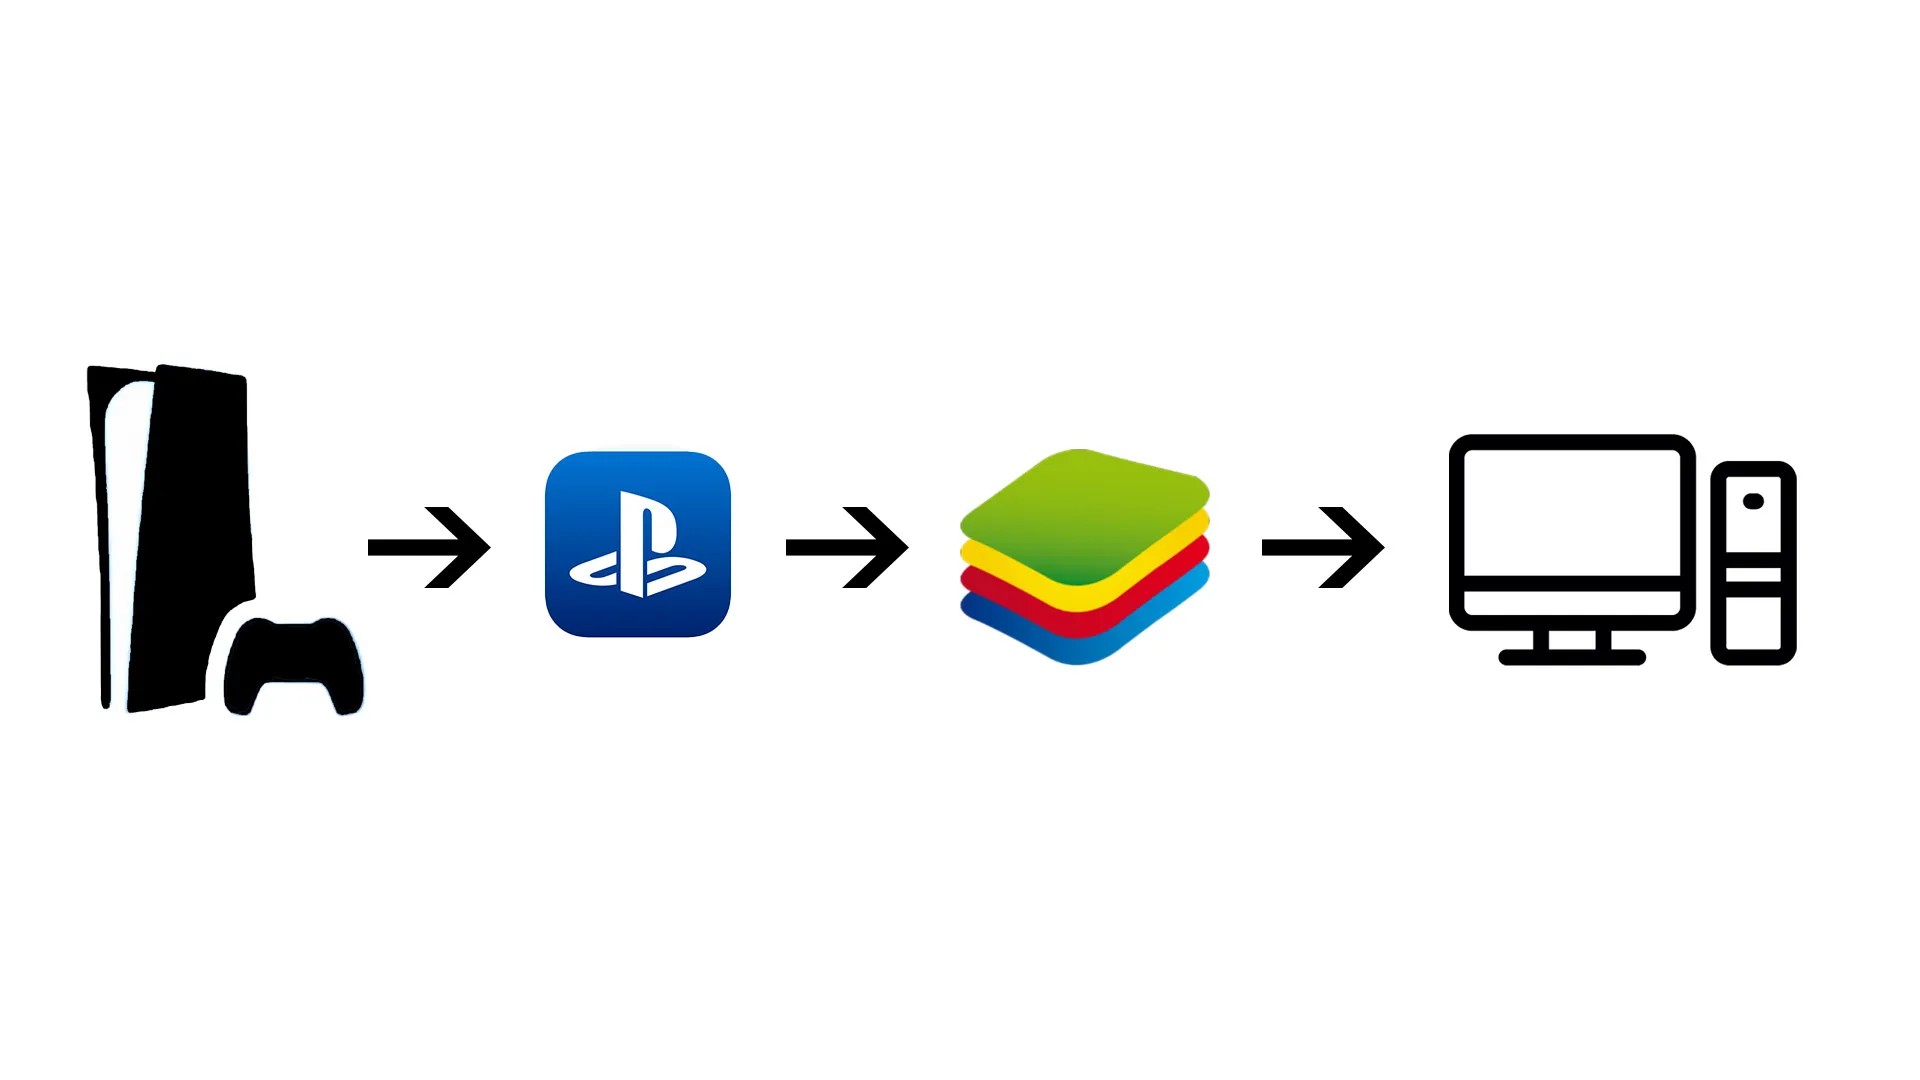 How to log in to Google Play Store on BlueStacks 5 – BlueStacks